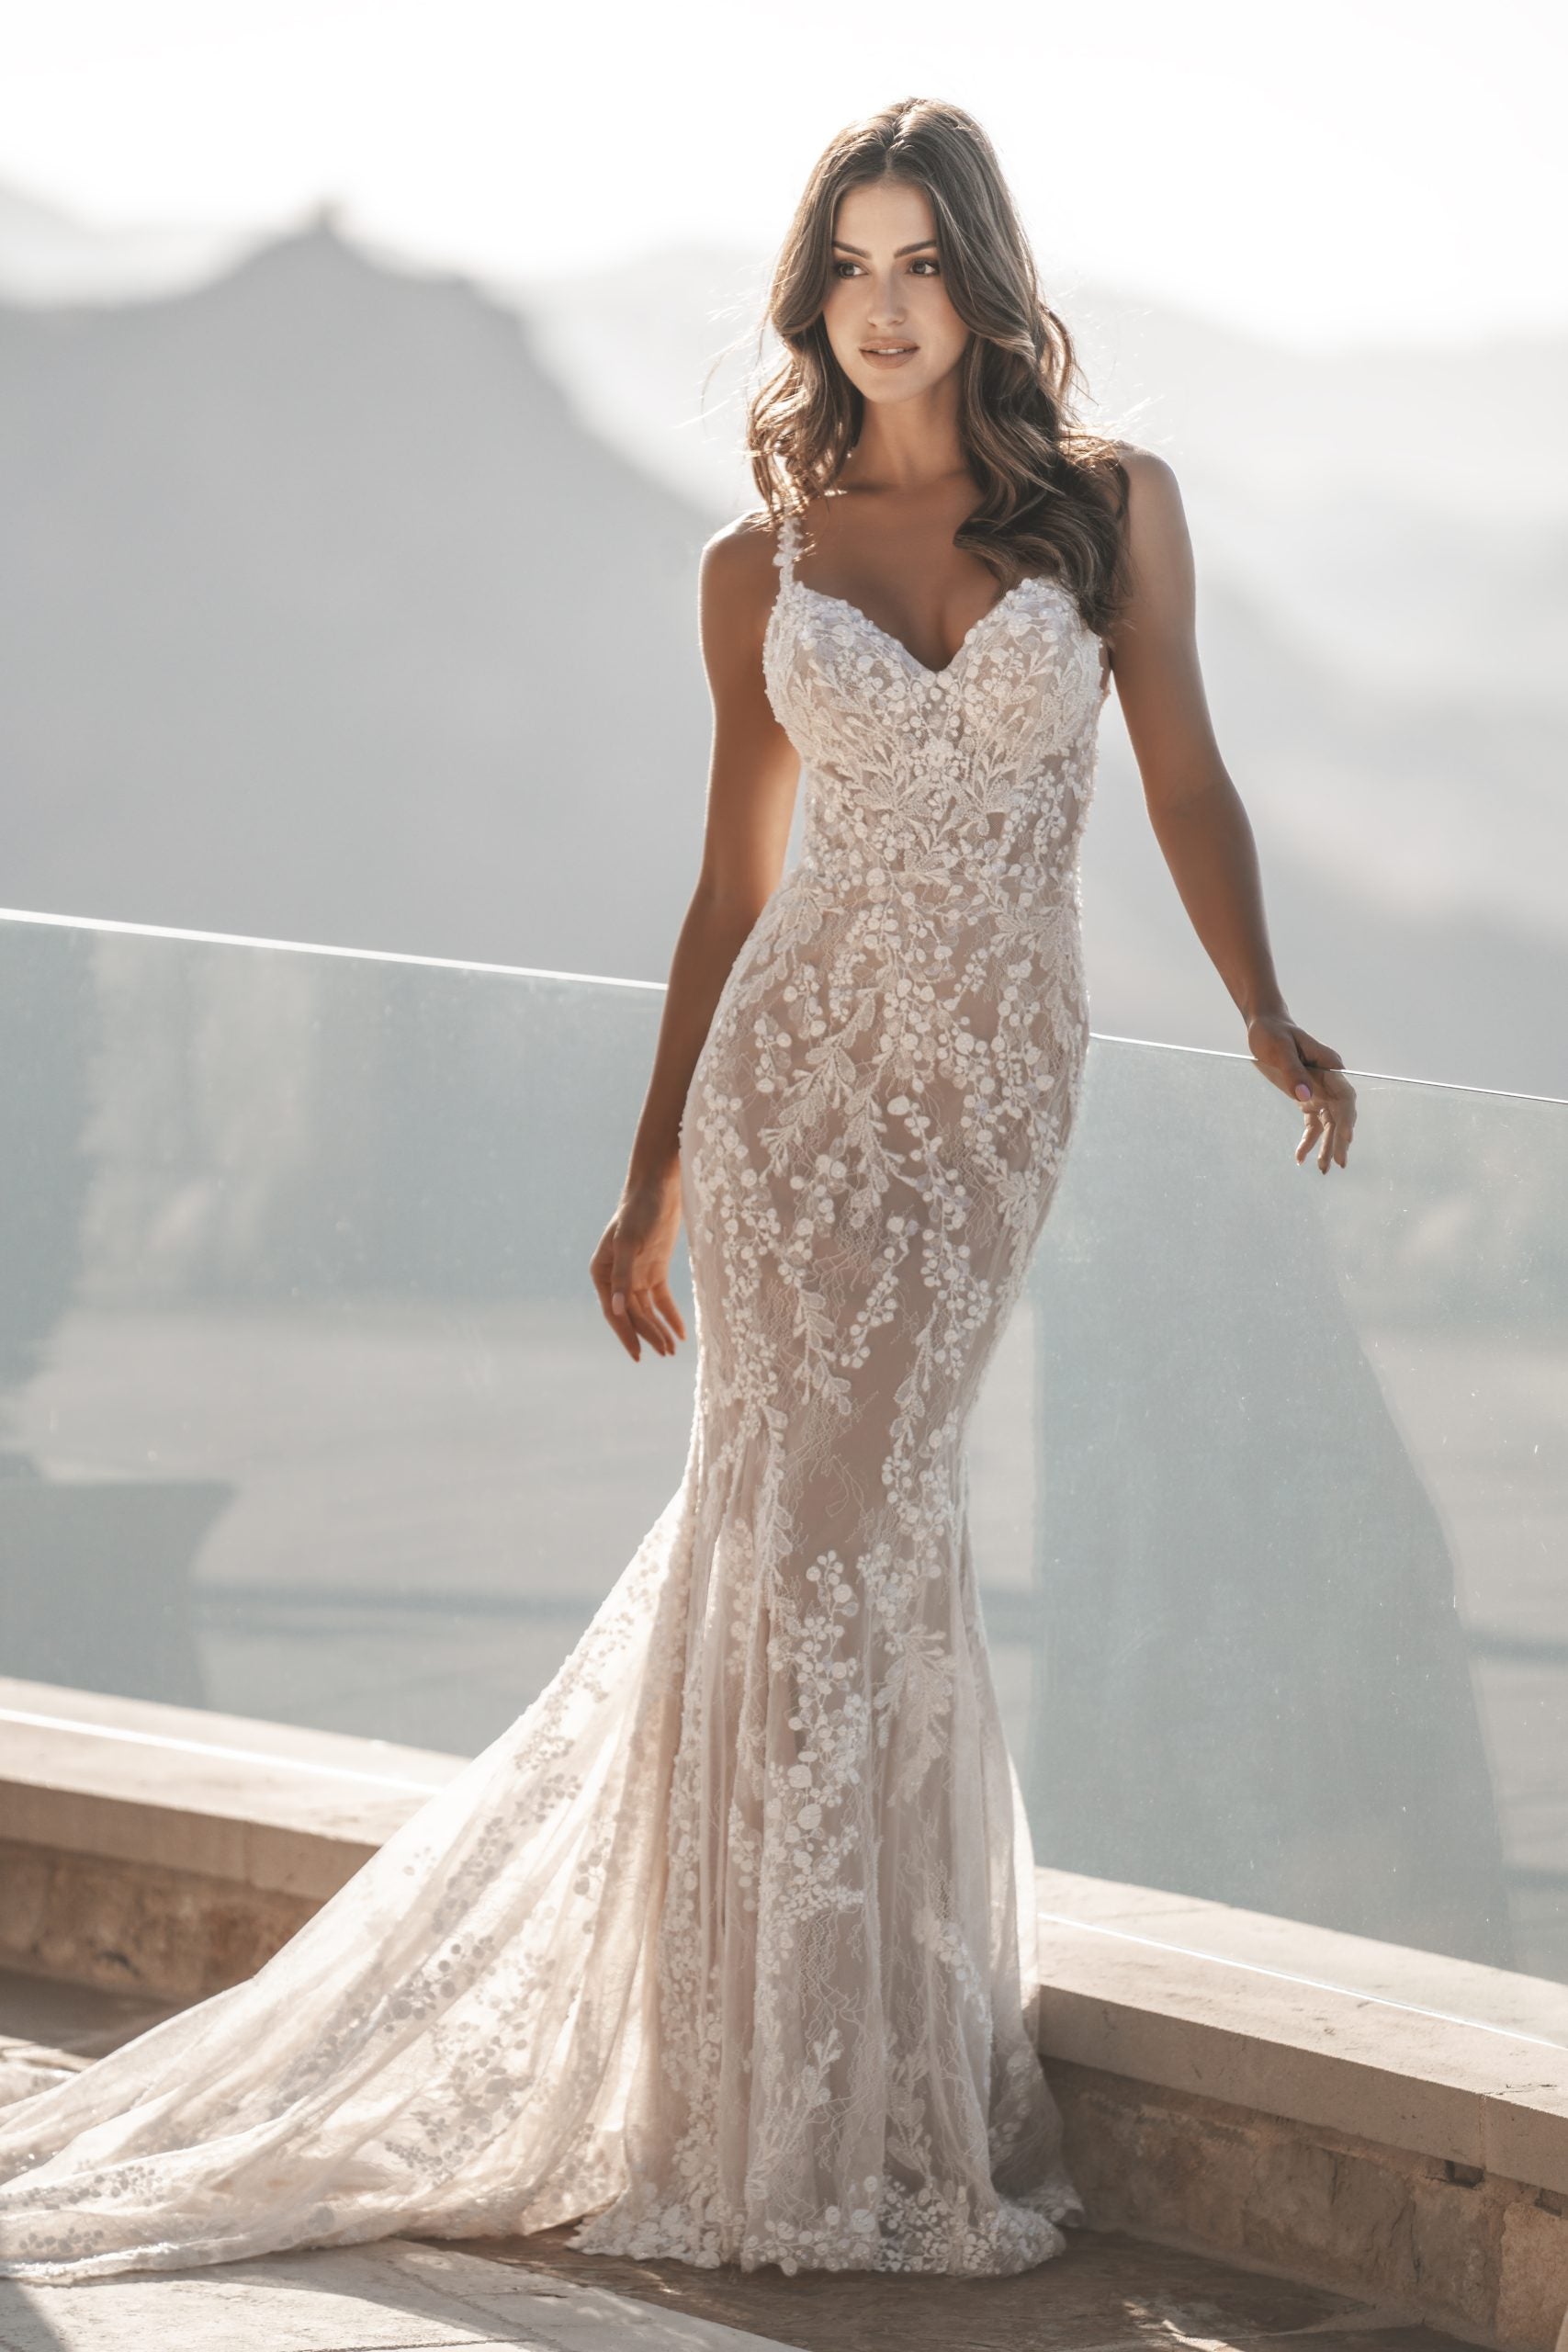 Romantic Lace Fit-and-Flare Gown by Allure Bridals - Image 1